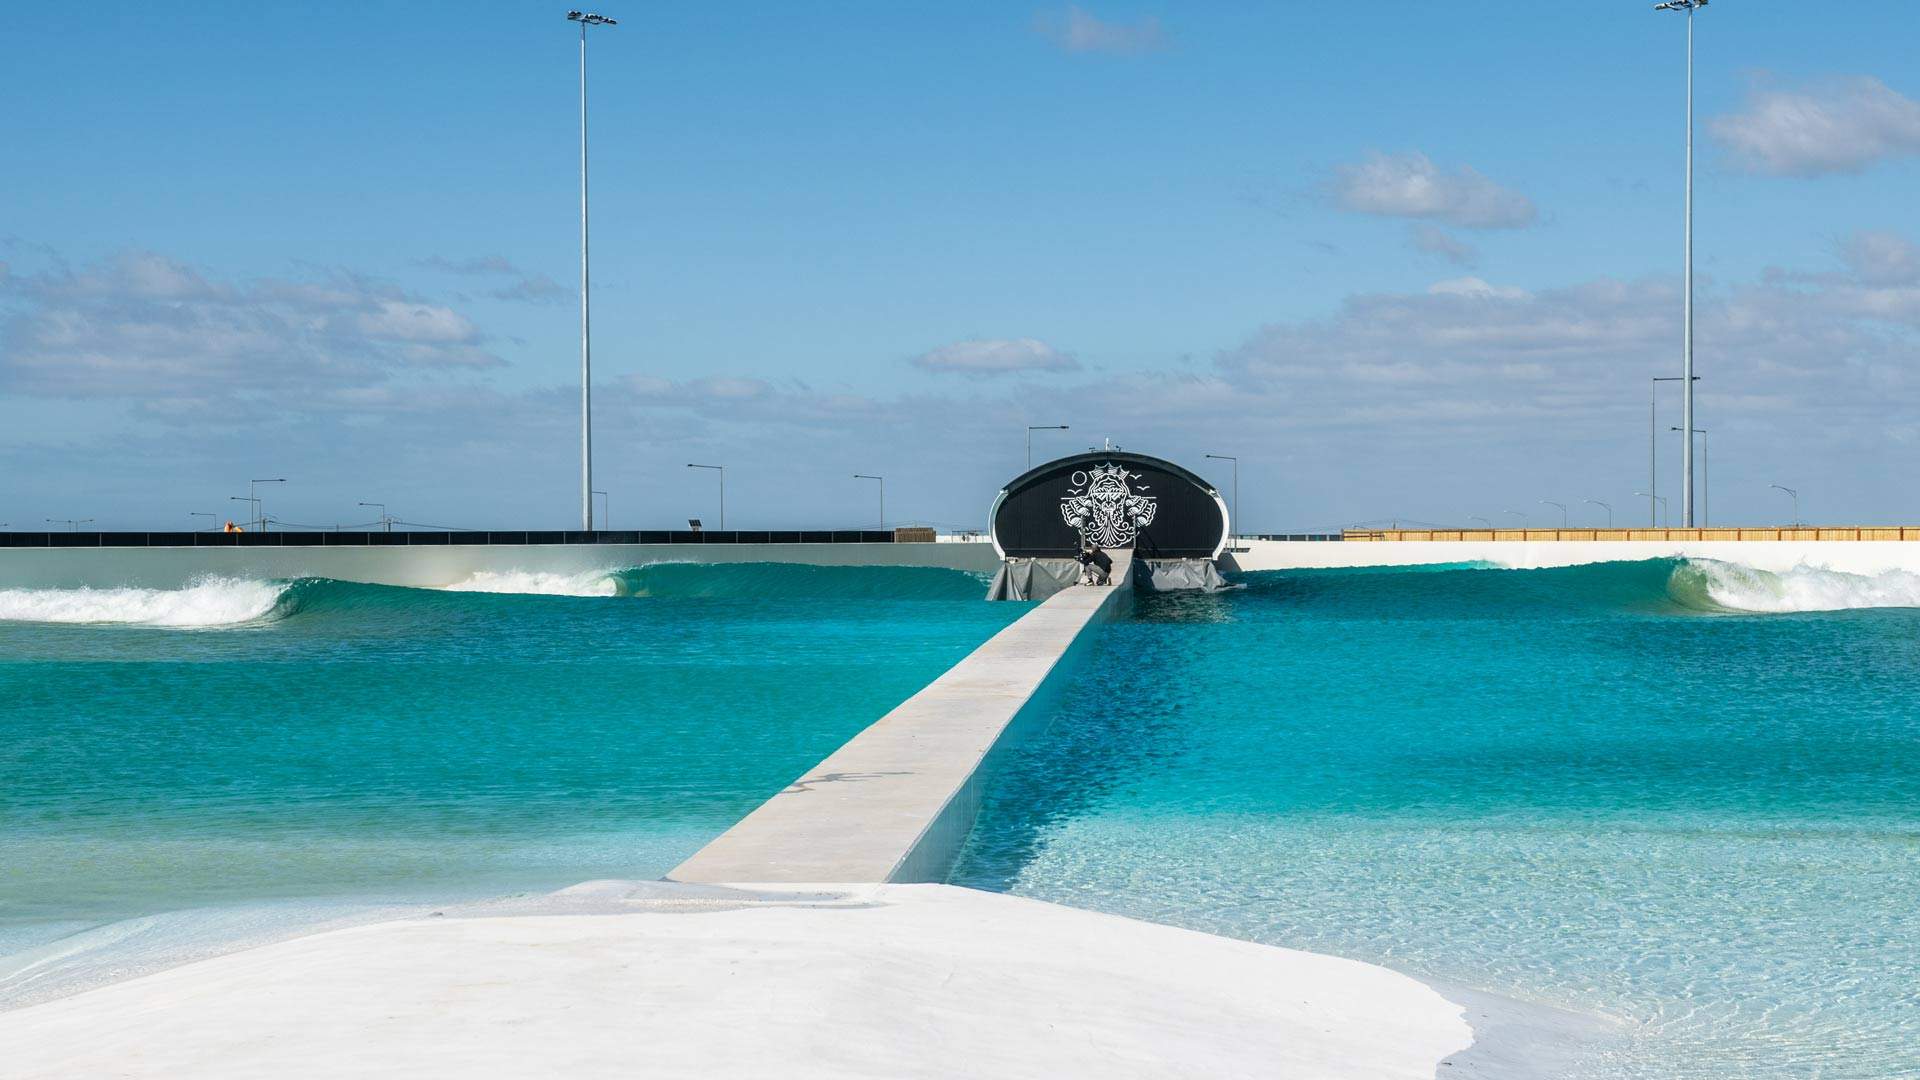 Melbourne's Surf Park Urbnsurf Will Start Pumping Out Waves Once Again This Week